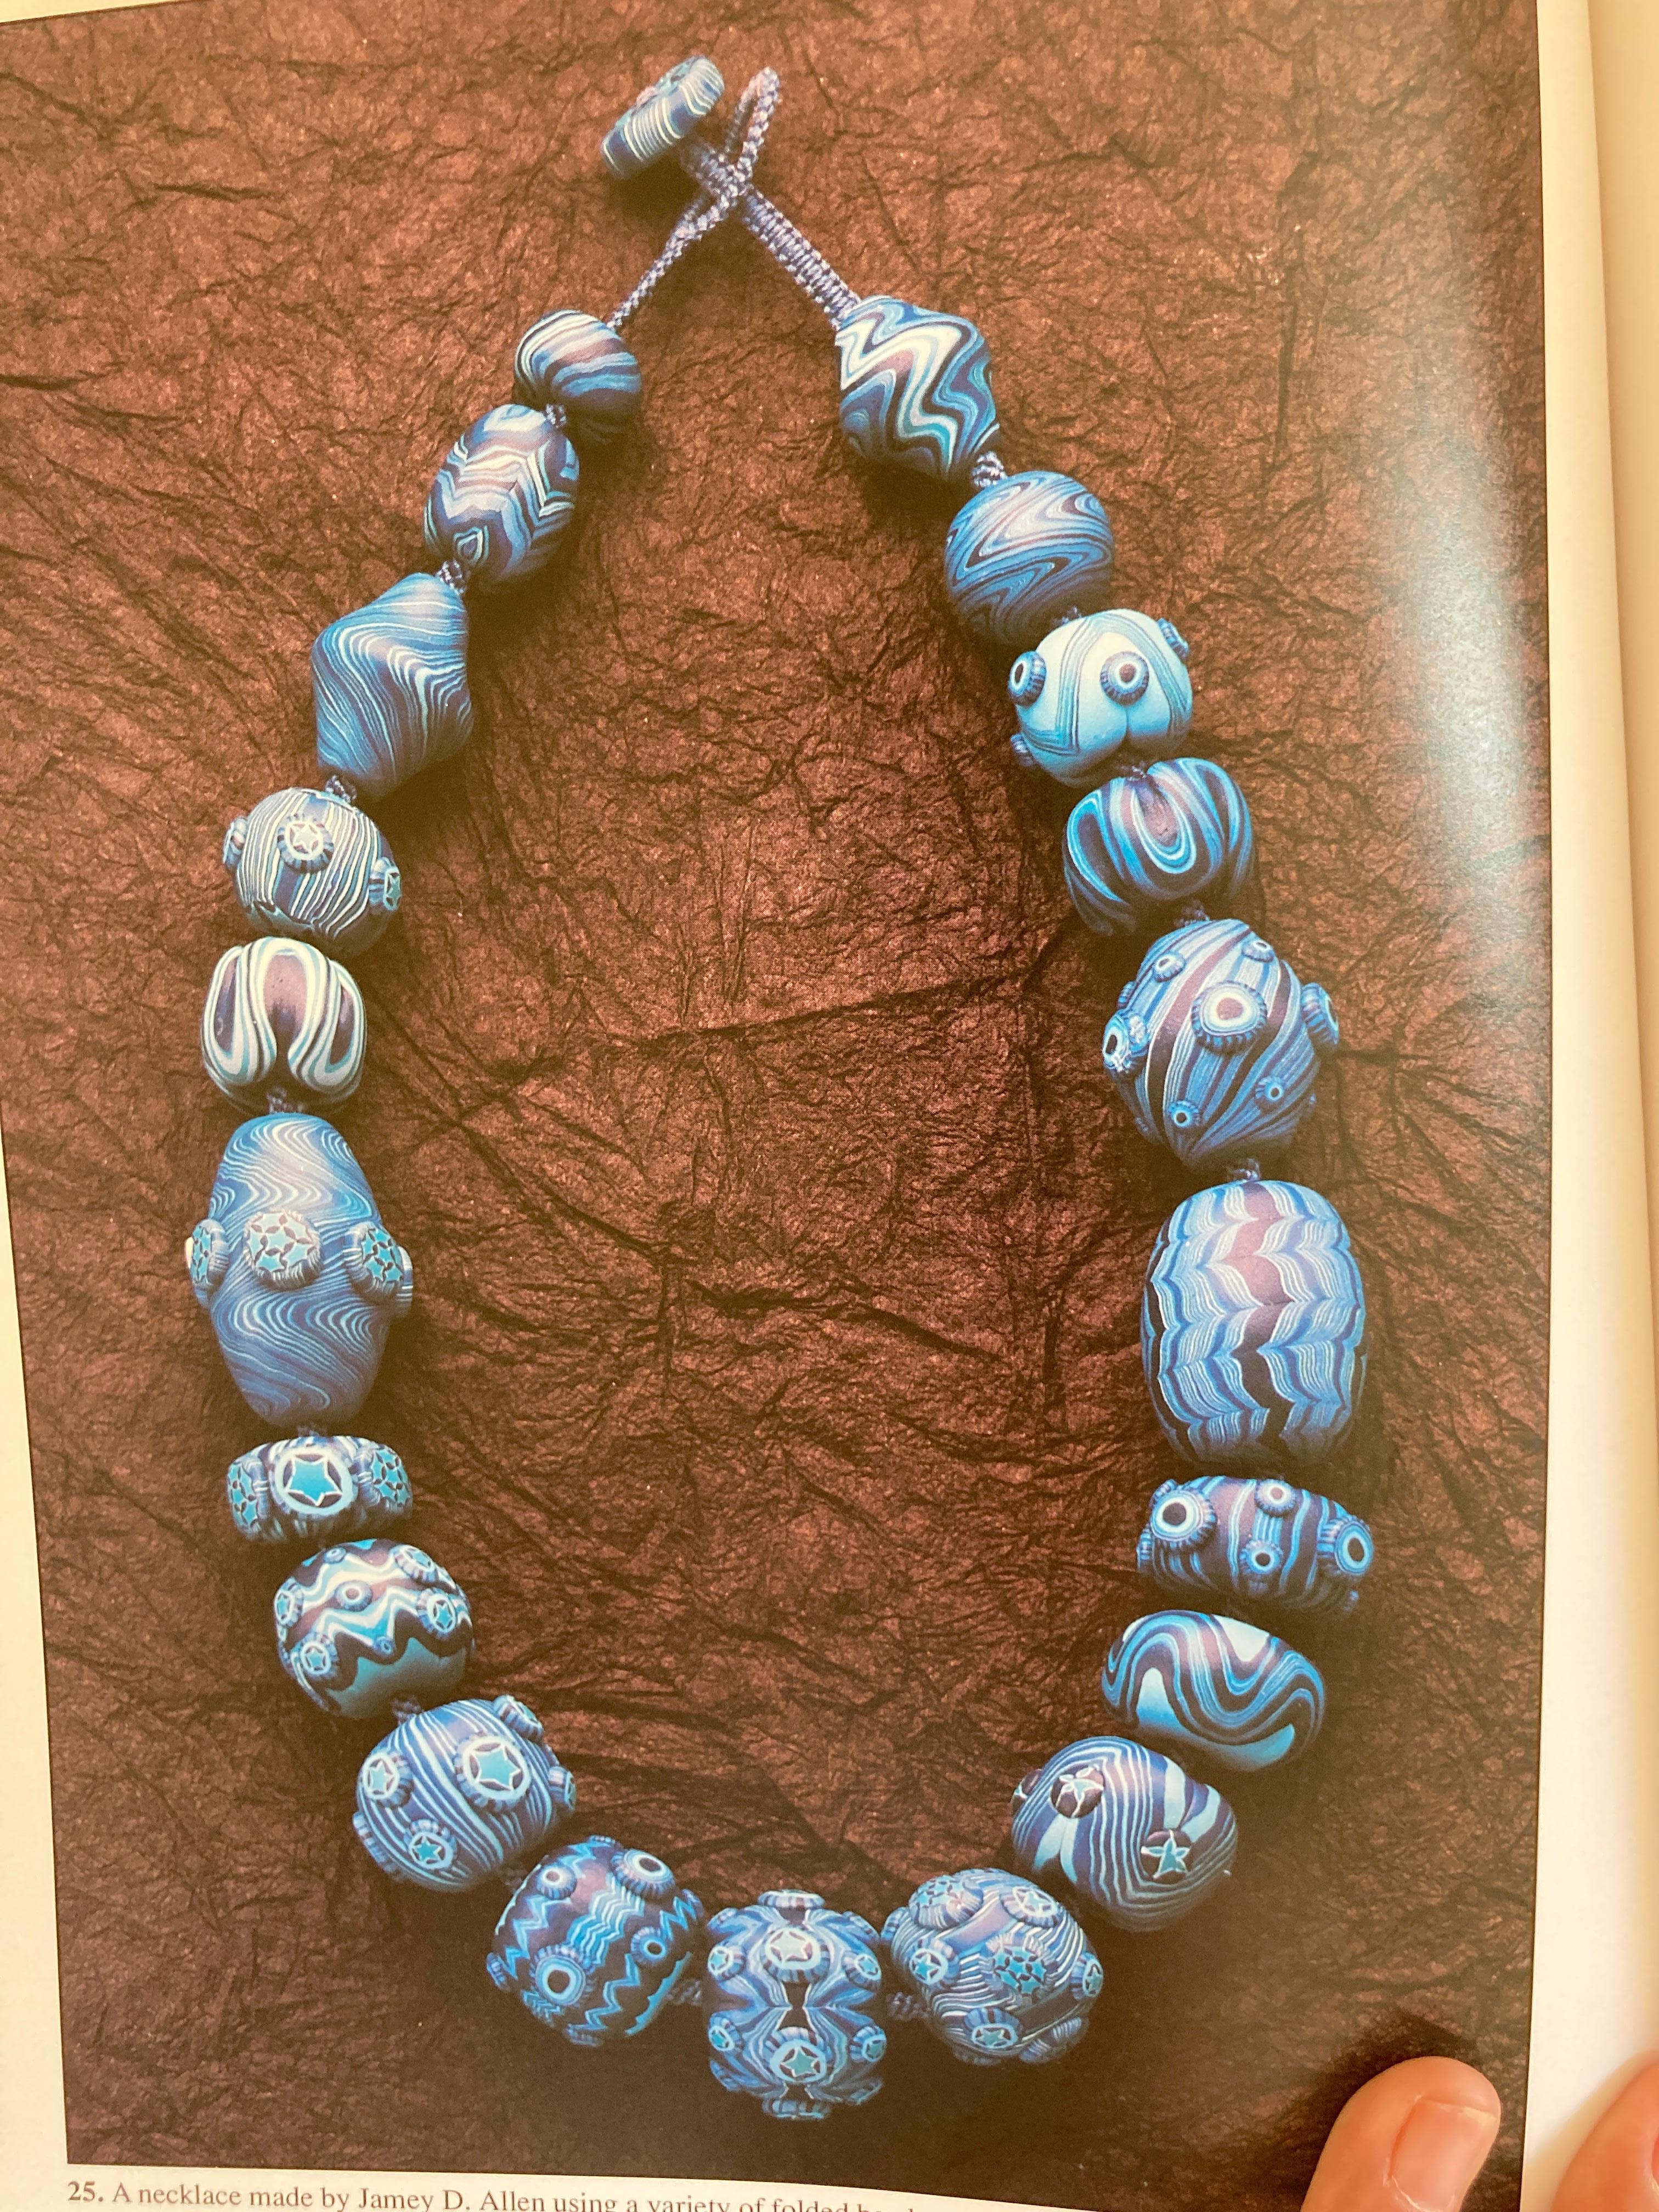 The New Clay Techniques and Approaches to Jewelry Making, Buch (20. Jahrhundert) im Angebot